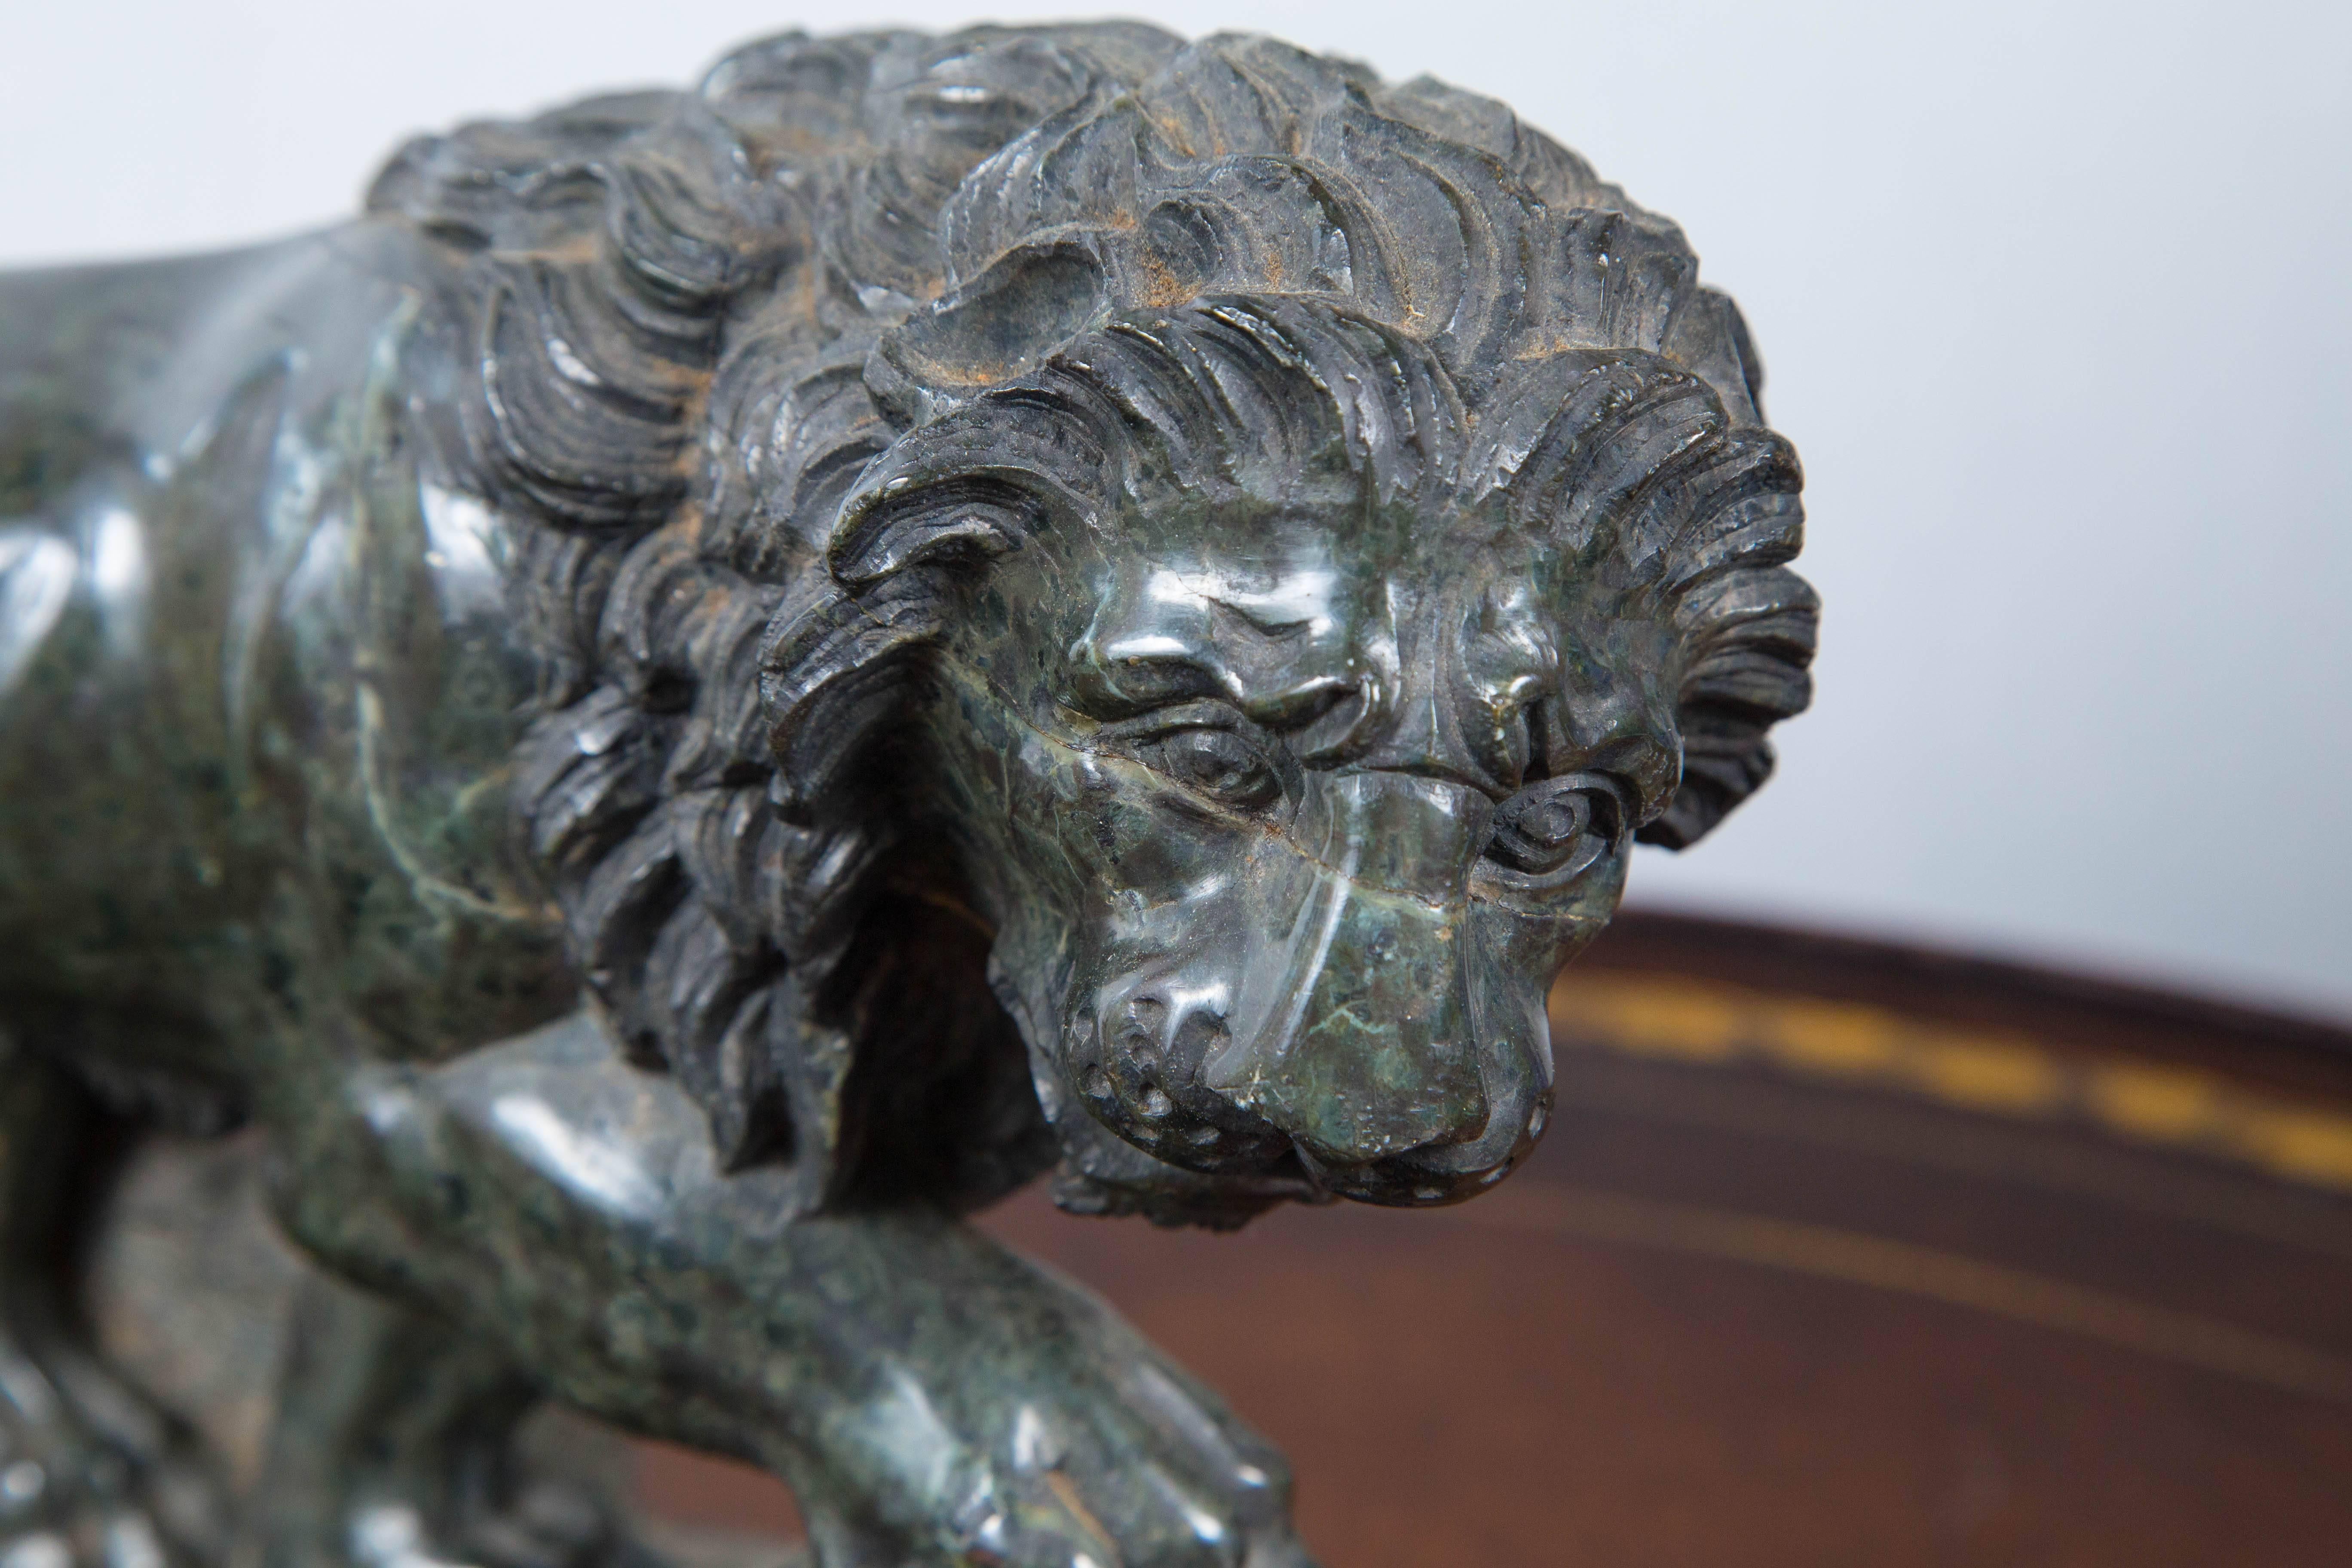 This lion, in dark green marble is a late 19th-early 20th century rendition of one the Medici lions. The Medici lions are a pair of marble sculptures of lions, one of which is of ancient origin, the other a 16th century pendant; both were by 1598